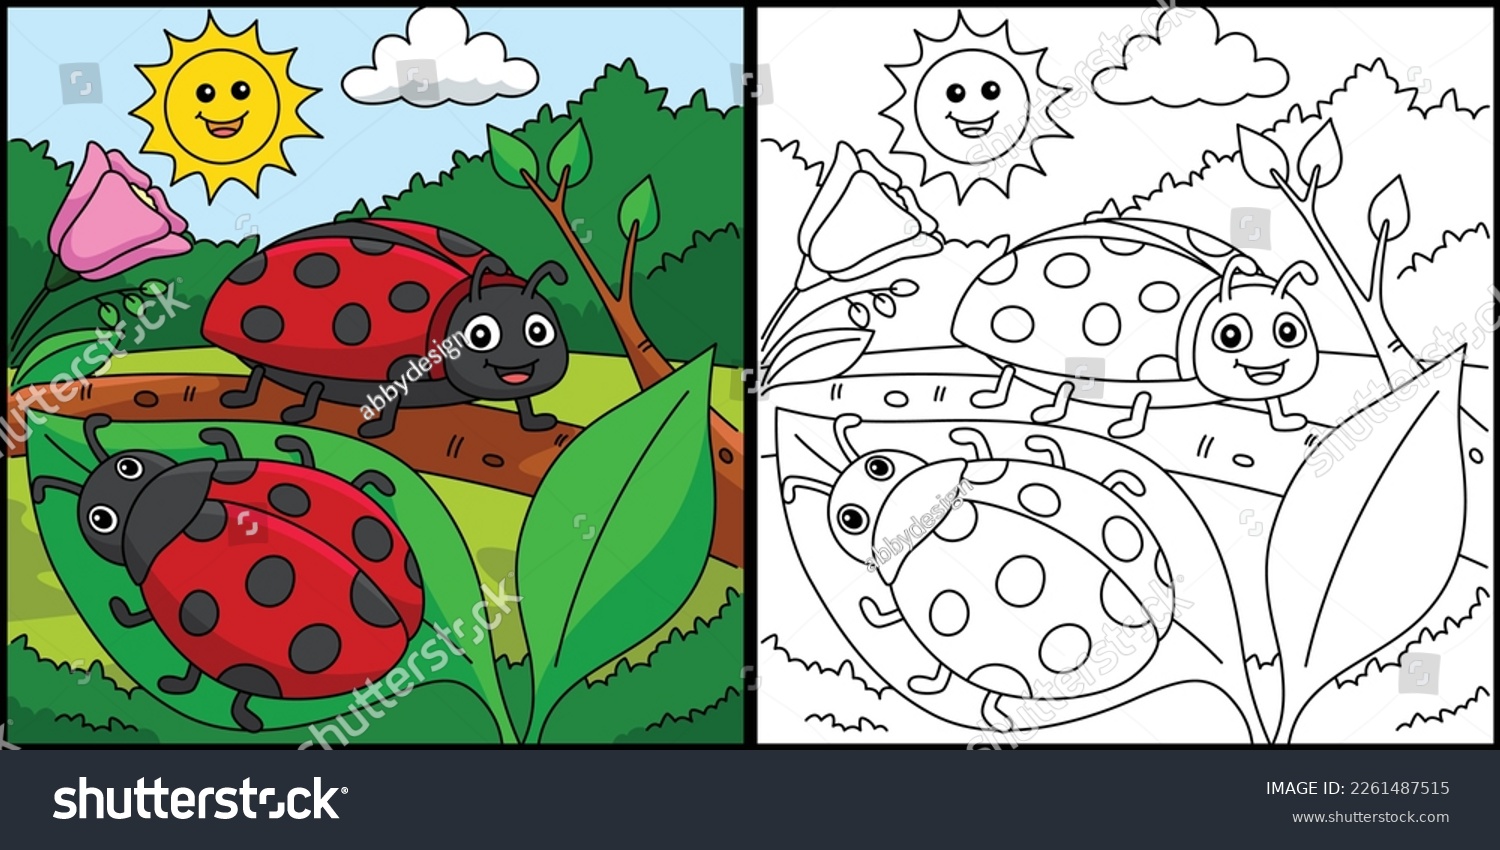 Ladybug coloring pages images stock photos d objects vectors